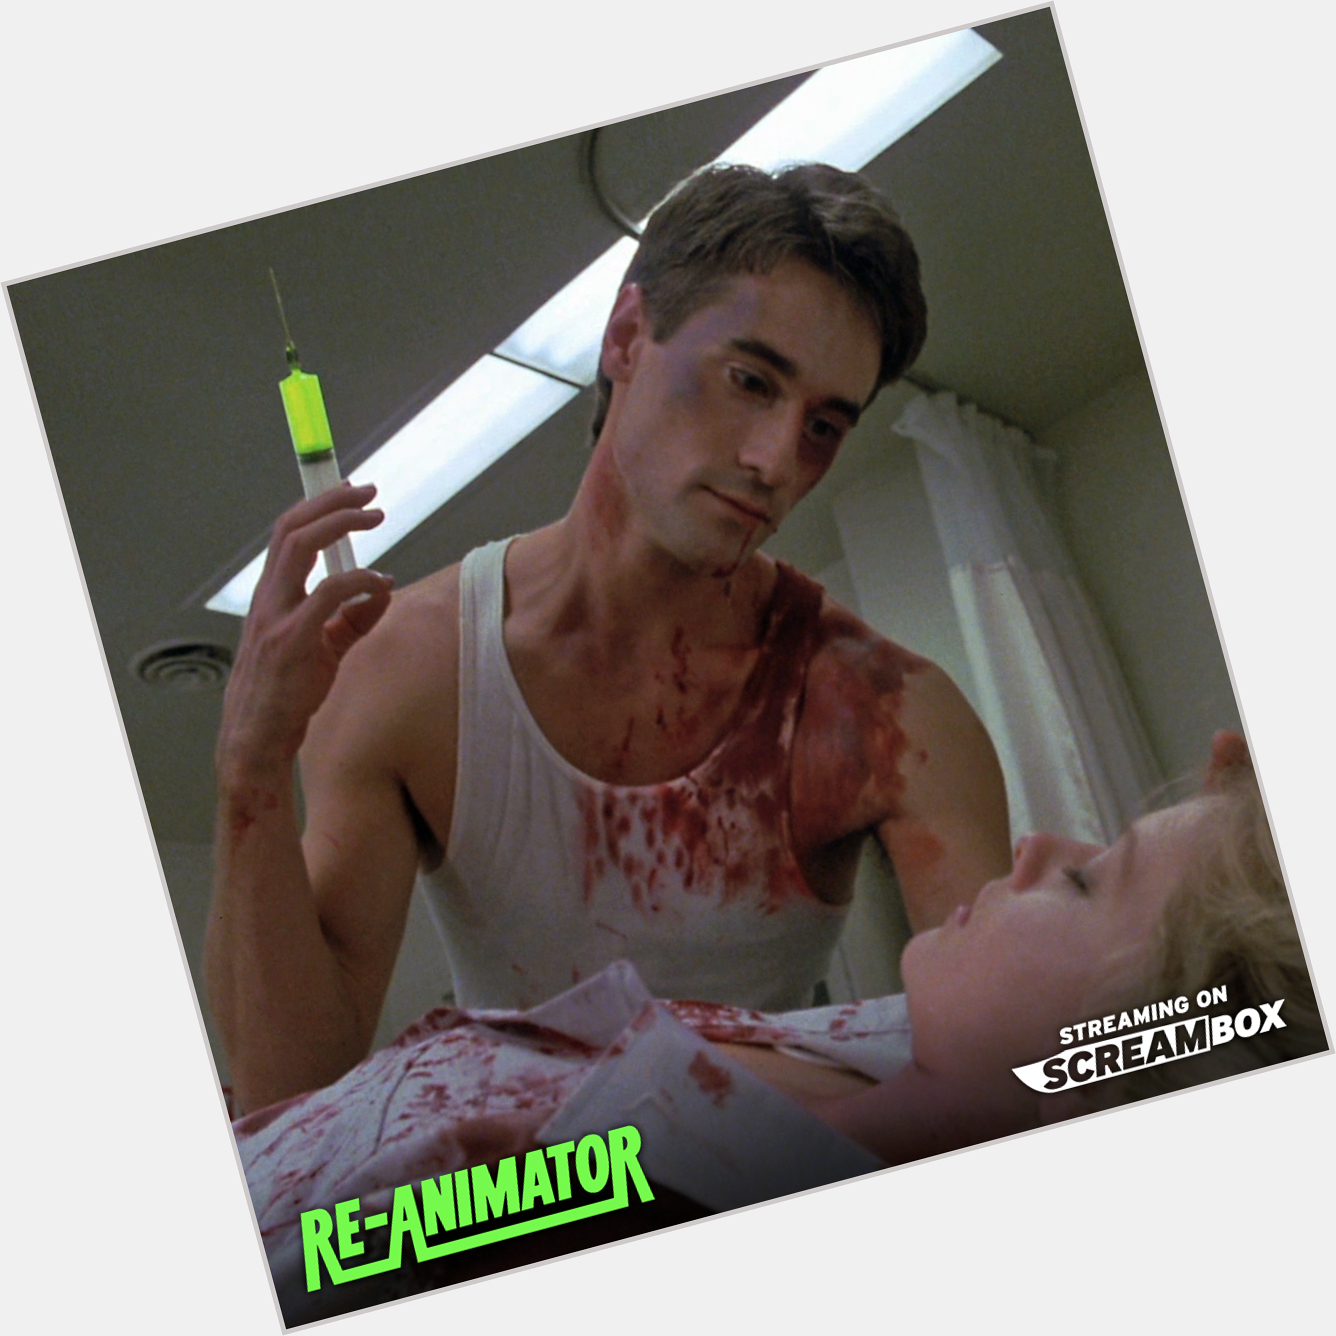 Happy 68th birthday to Bruce Abbott!

Inject some Re-Animator into your life today on Screambox. 